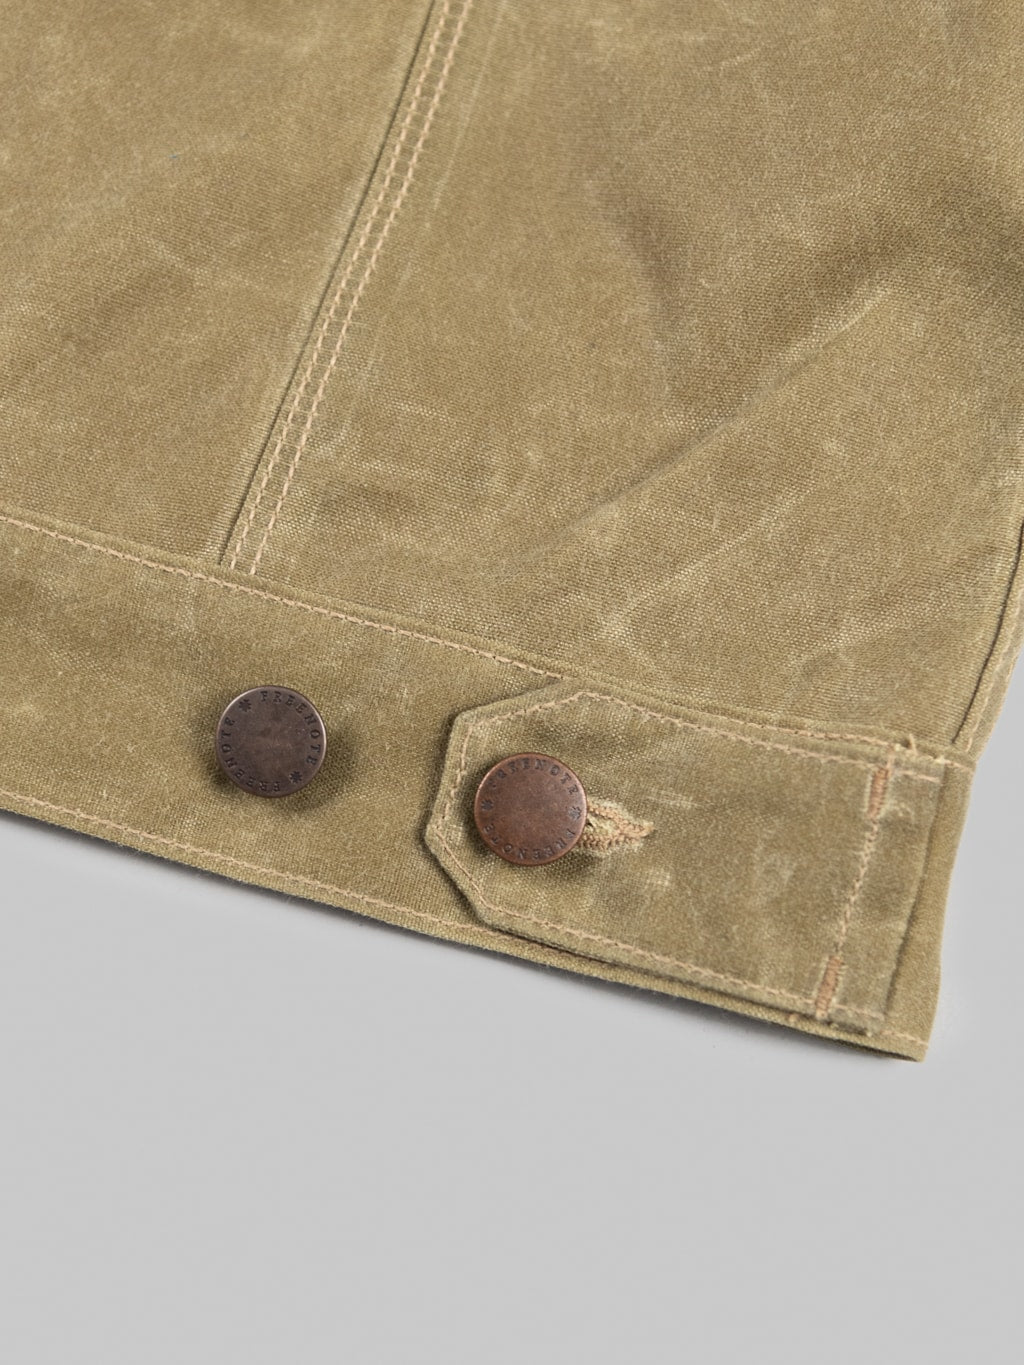 Freenote Cloth Riders Jacket Waxed Canvas Tobacco waist buttons closeup